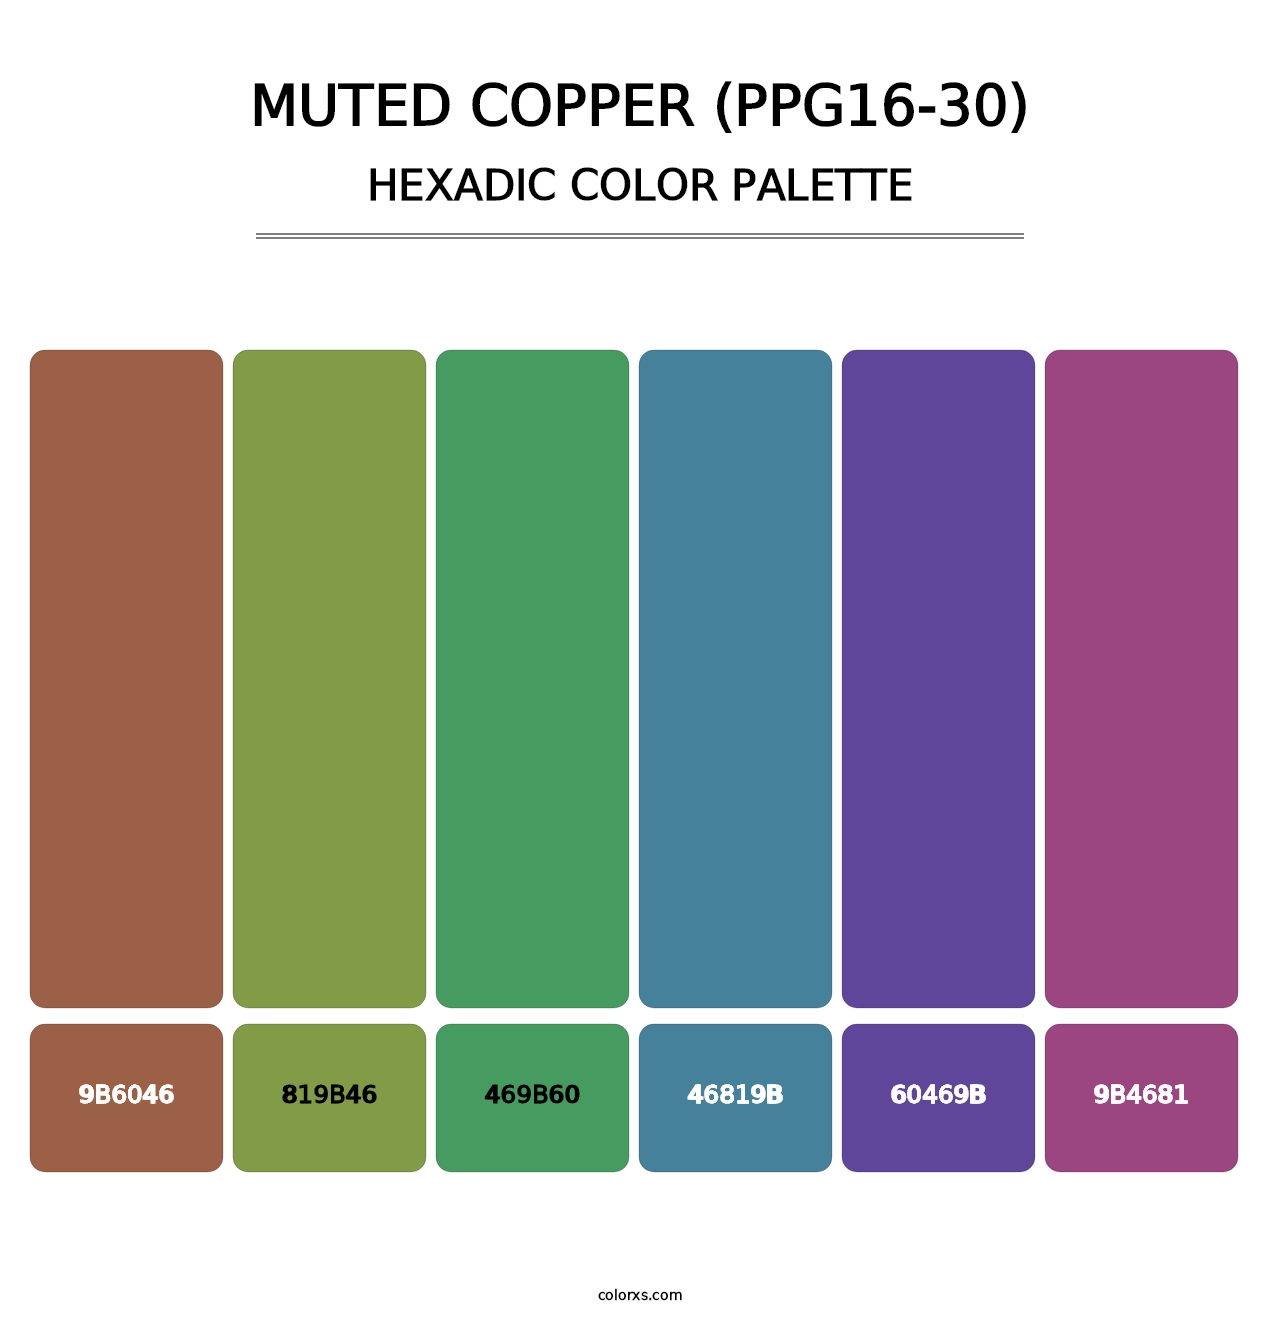 Muted Copper (PPG16-30) - Hexadic Color Palette